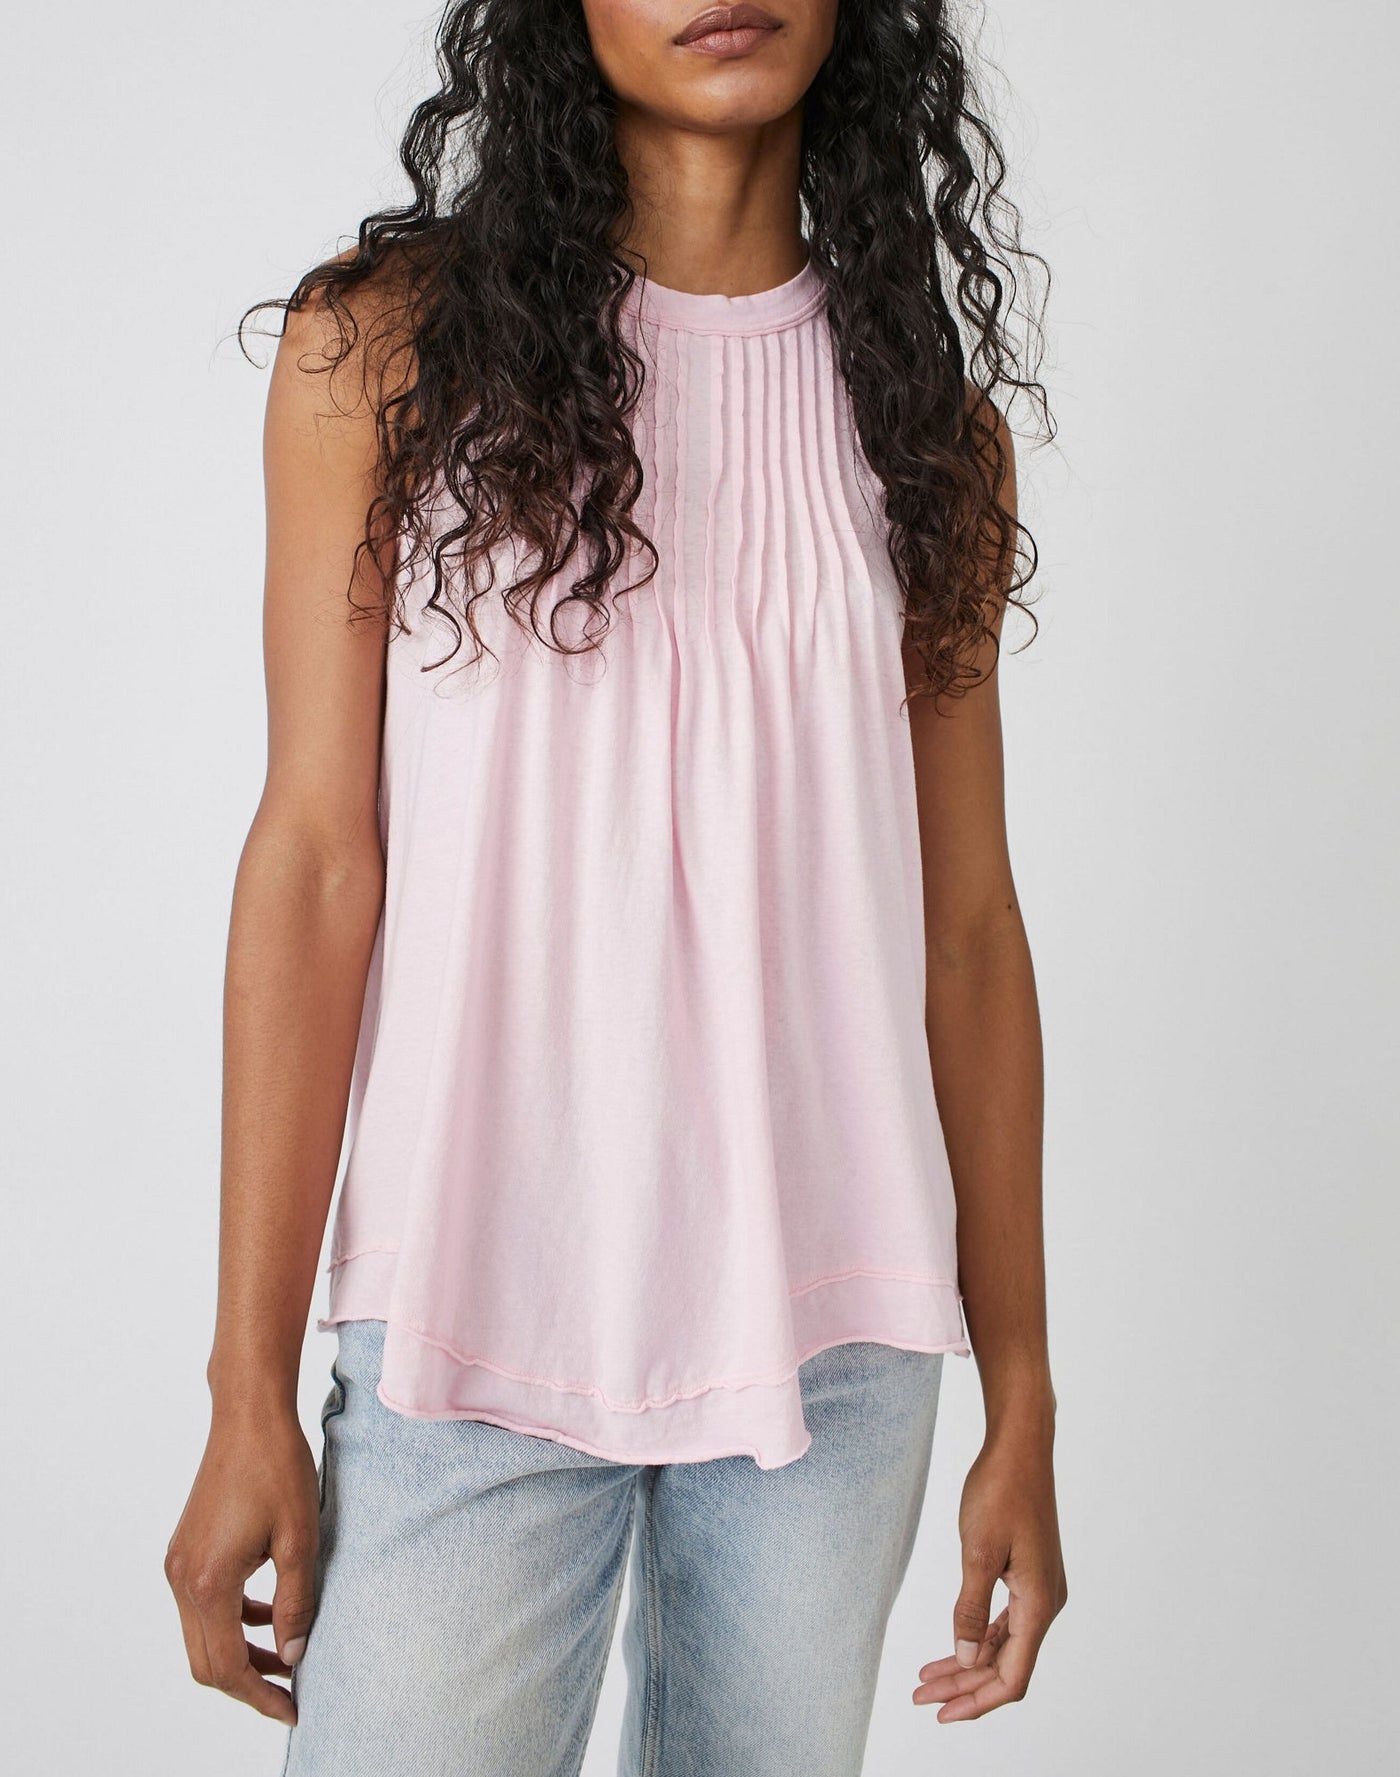 Pleated Tank // Pink Lemon This high-necked Pleated Tank in Pink Lemon is both effortless and essential. Wear it with your laidback look, or layer it up to build an outfit. Its relaxed, slouchy fit features pleating at the bust and dropped armholes, while subtle distressing at the hems complete the timeless, lived-in look. Embrace effortless style with this versatile and cool classic tank.   Hand Wash Cold  Measurements for size small Bust: 41 in Length: 28 in  Contents 100% Cotton